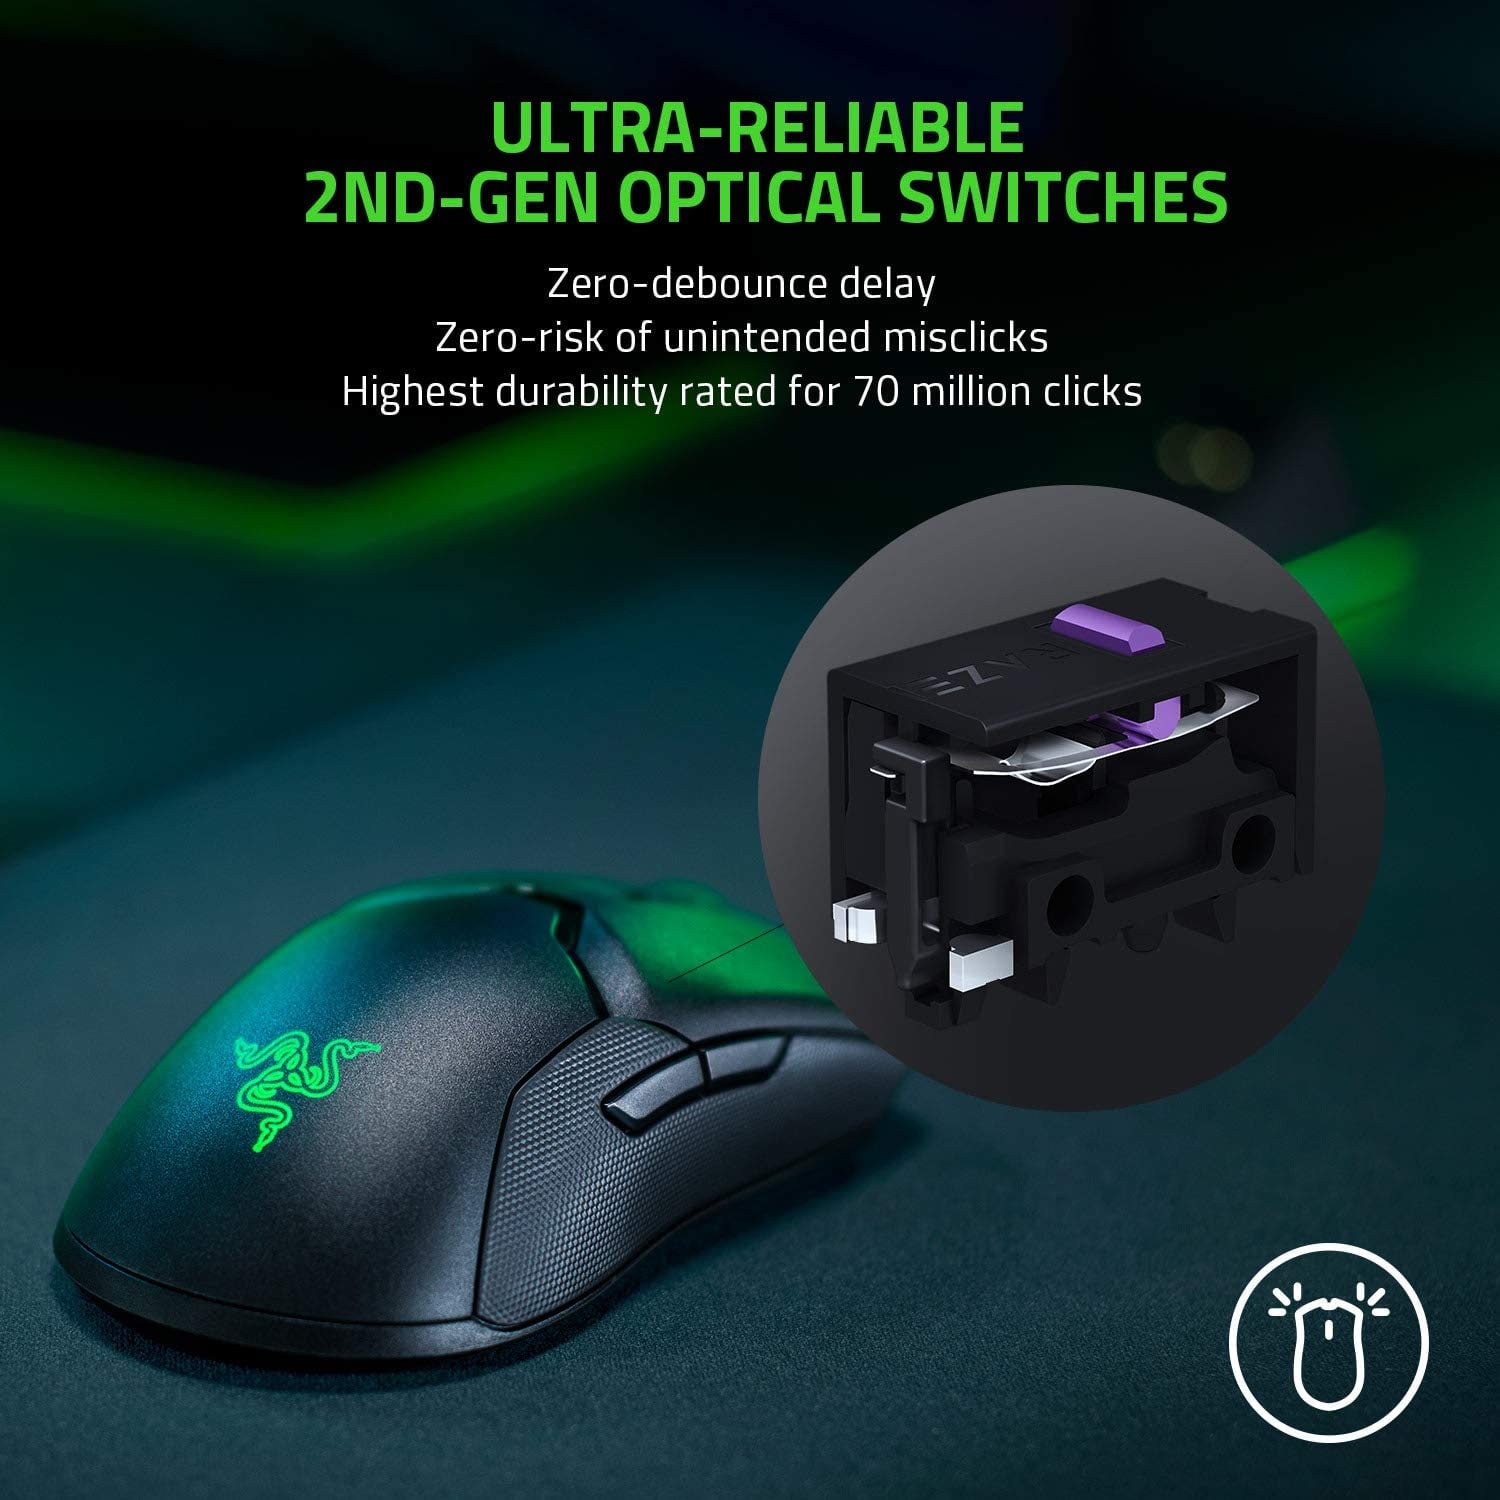 Razer Viper Ultimate Hyperspeed Lightest Wireless Gaming Mouse & RGB Charging Dock BRAND NEW - 2